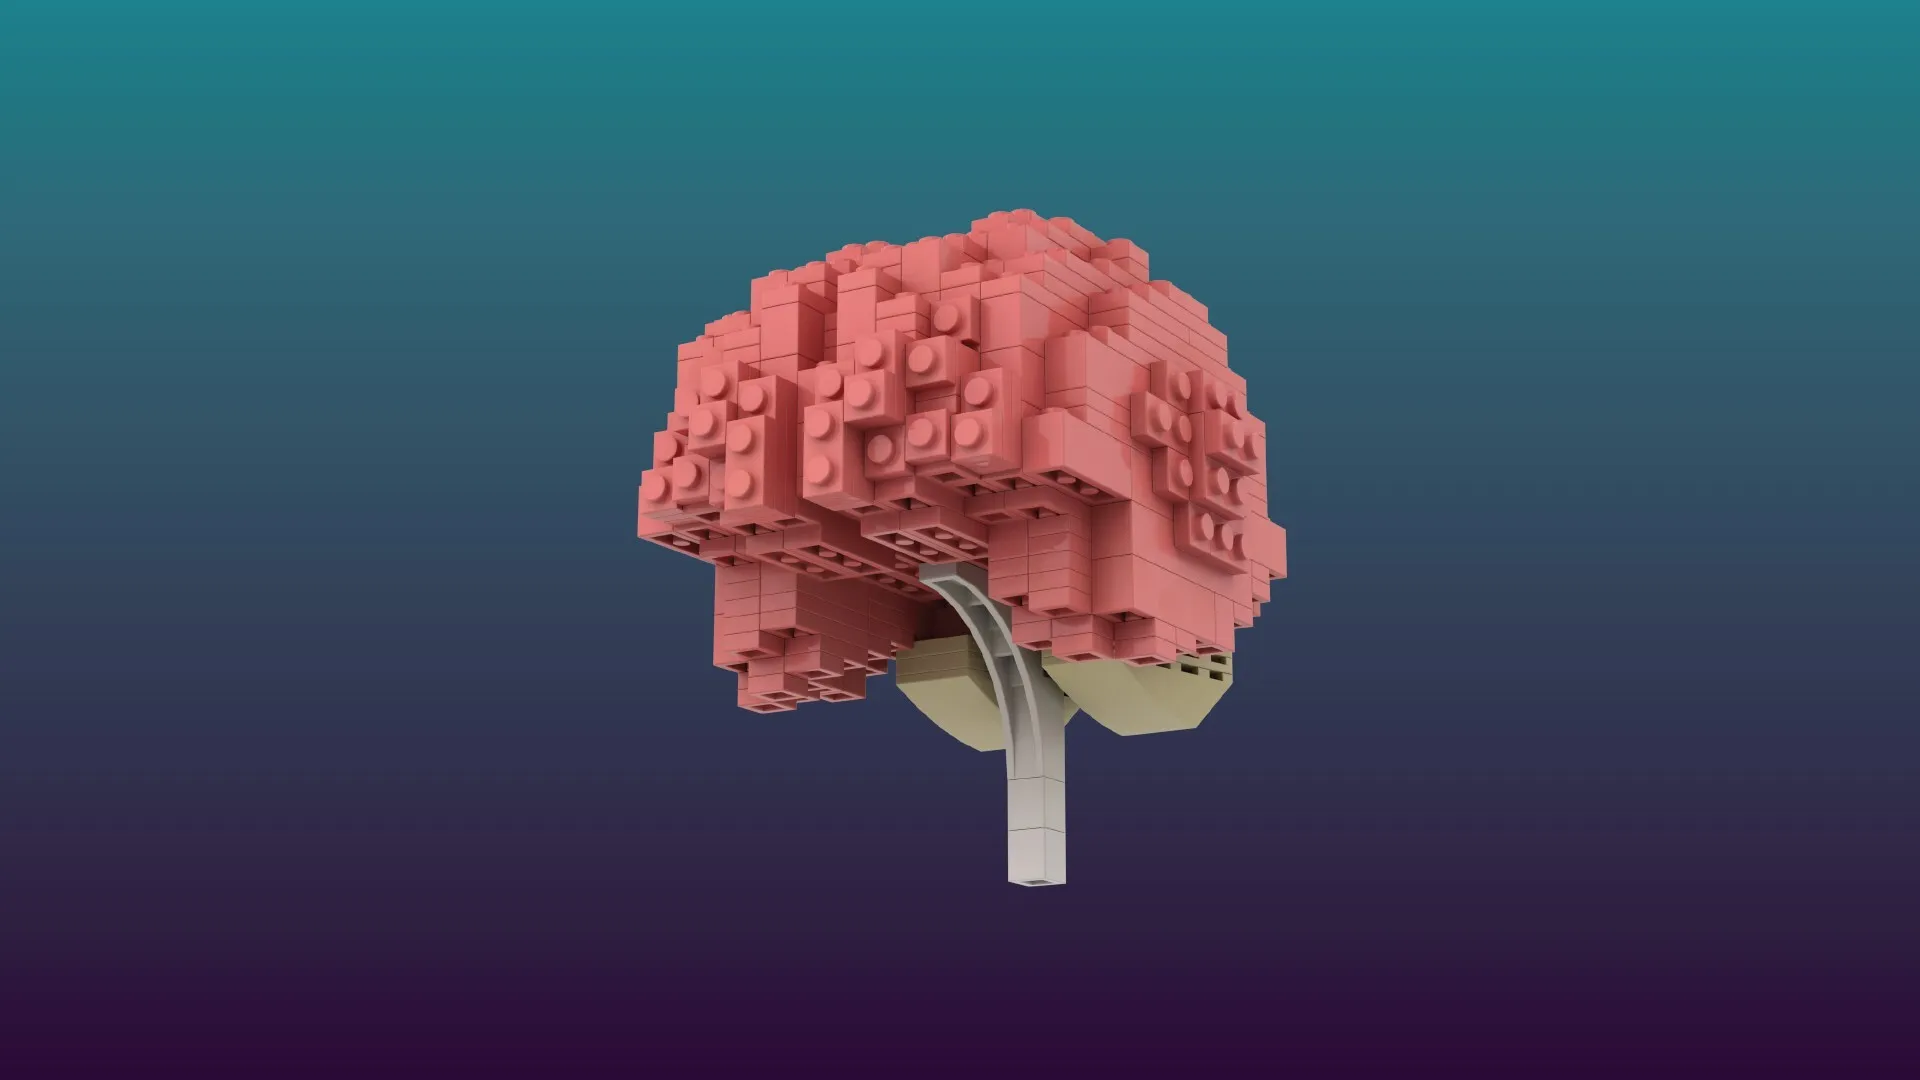 Illustration of a brain built out of Lego blocks.